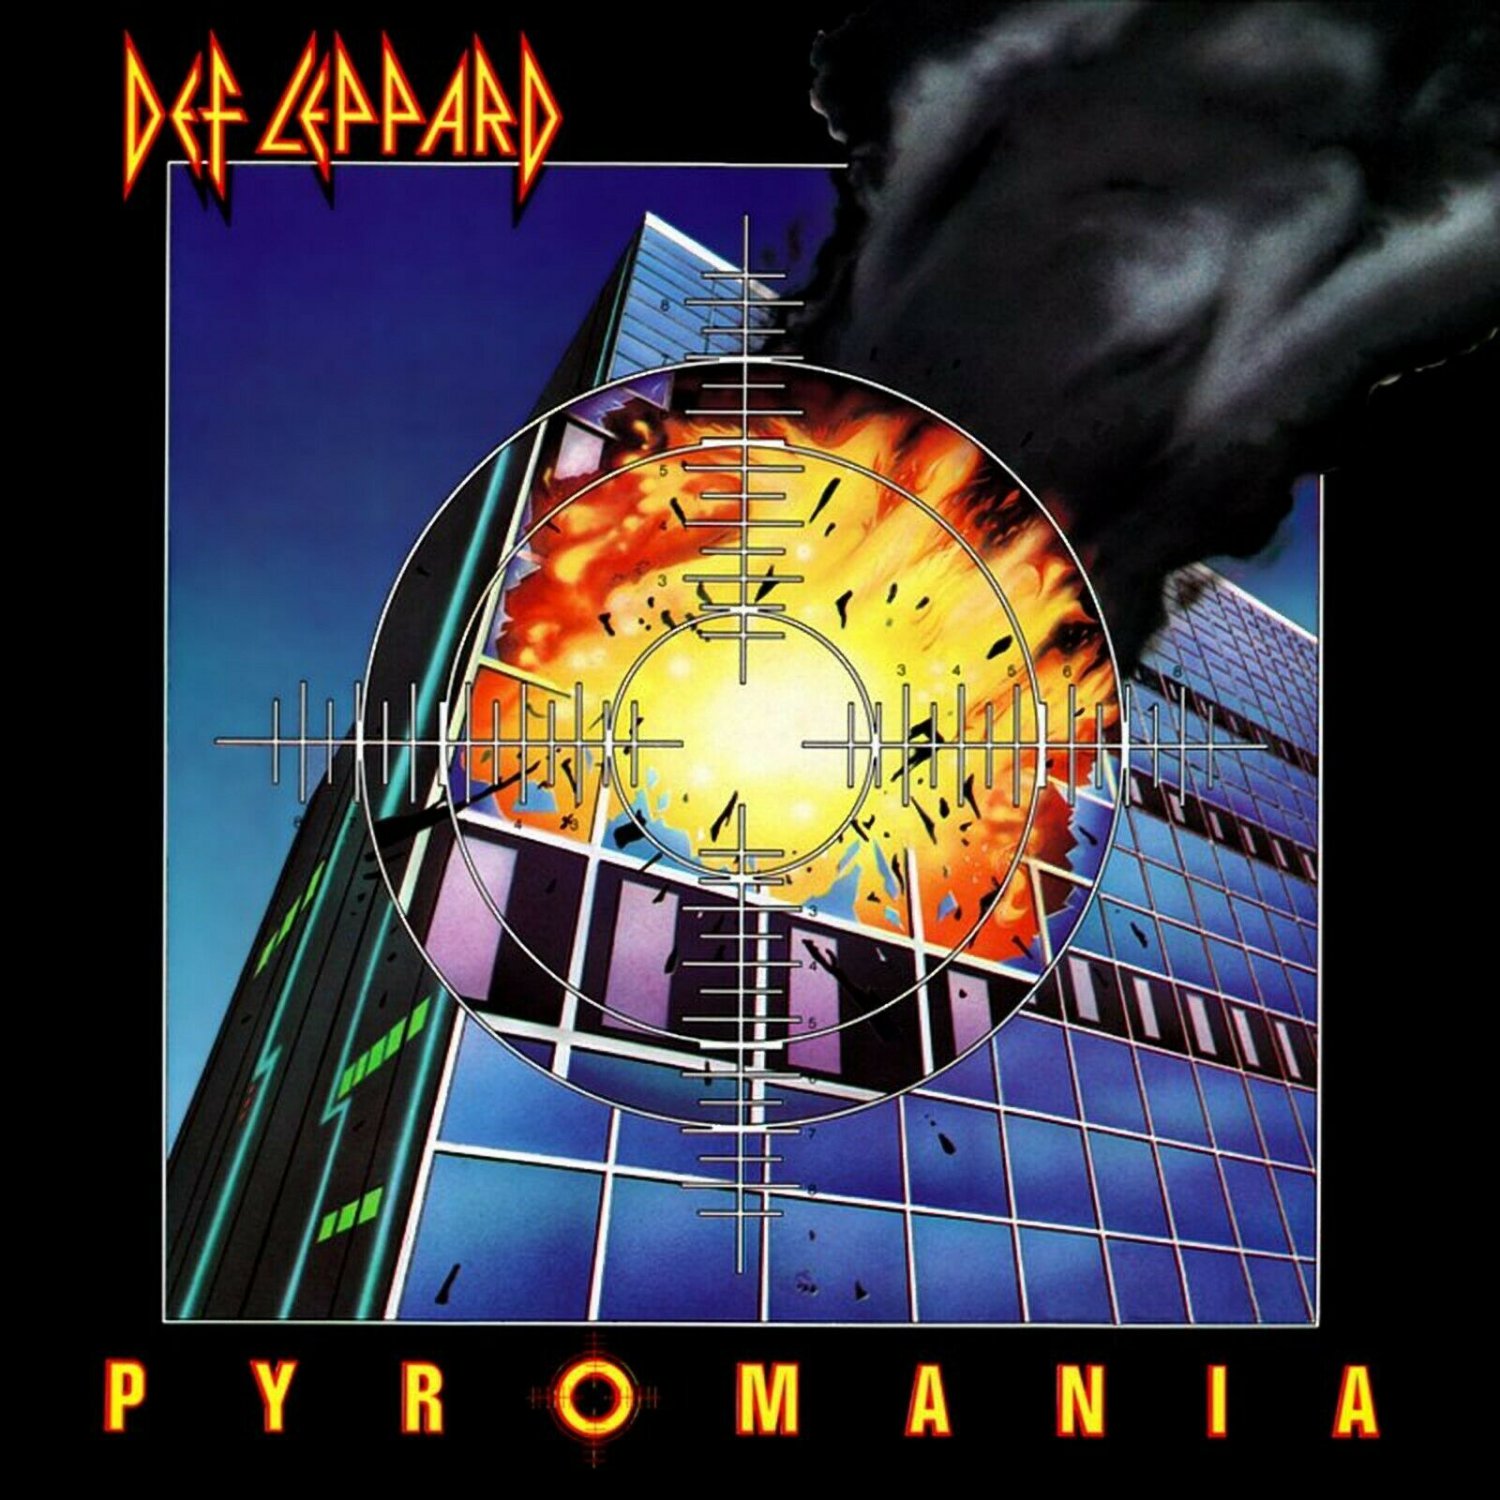 DEF LEPPARD Pyromania BANNER Huge 4X4 Ft Fabric Poster